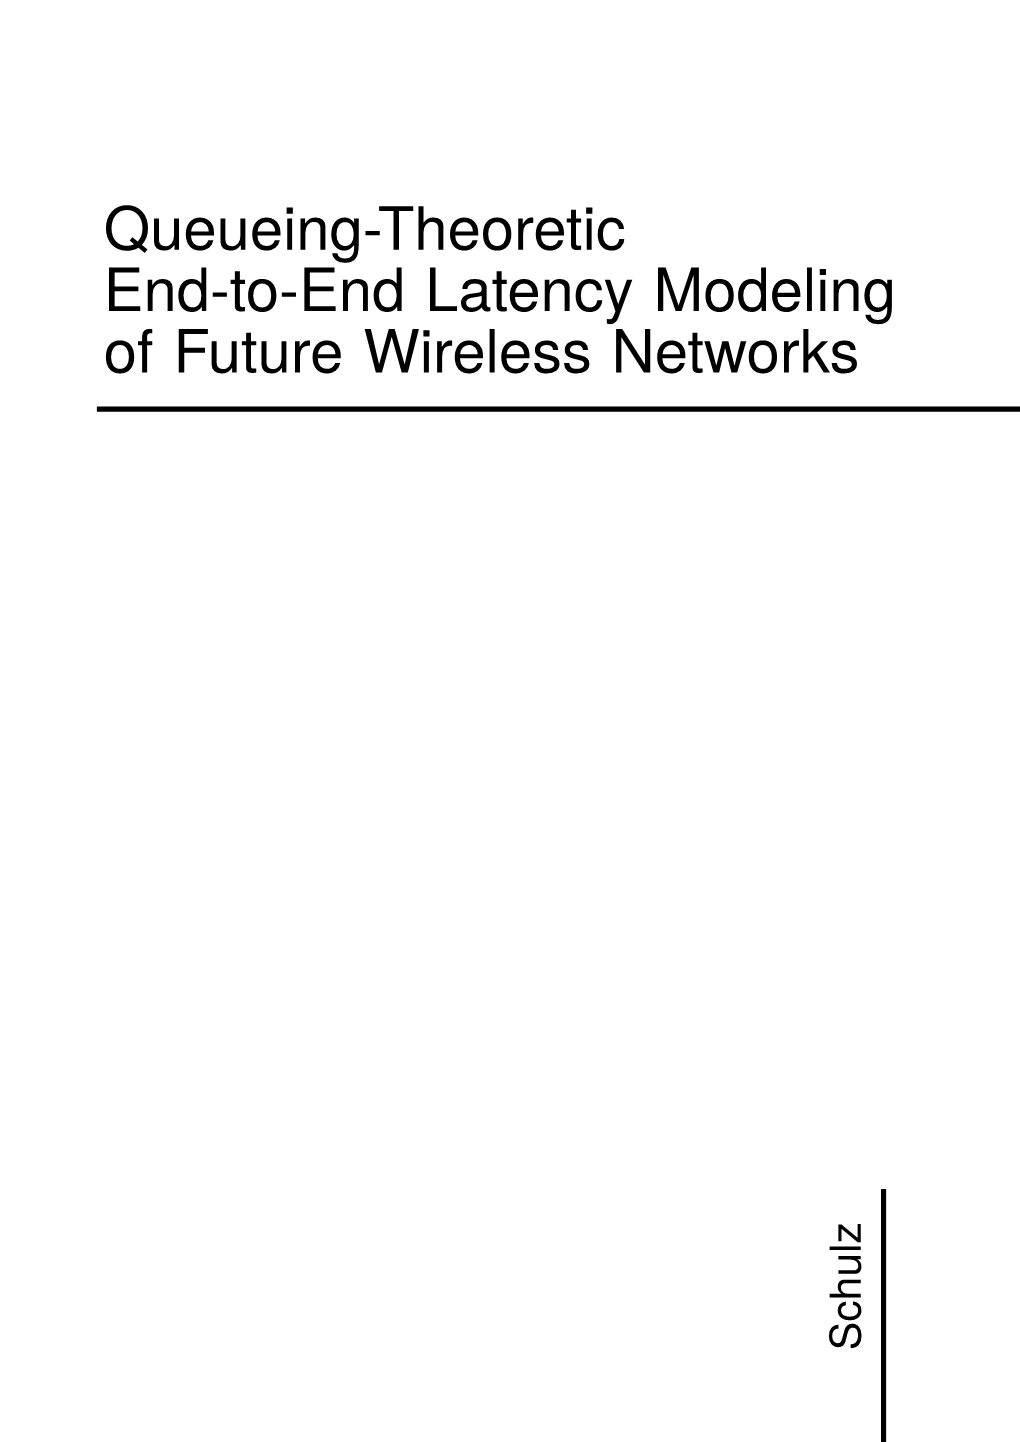 Queueing-Theoretic End-To-End Latency Modeling of Future Wireless Networks Schulz